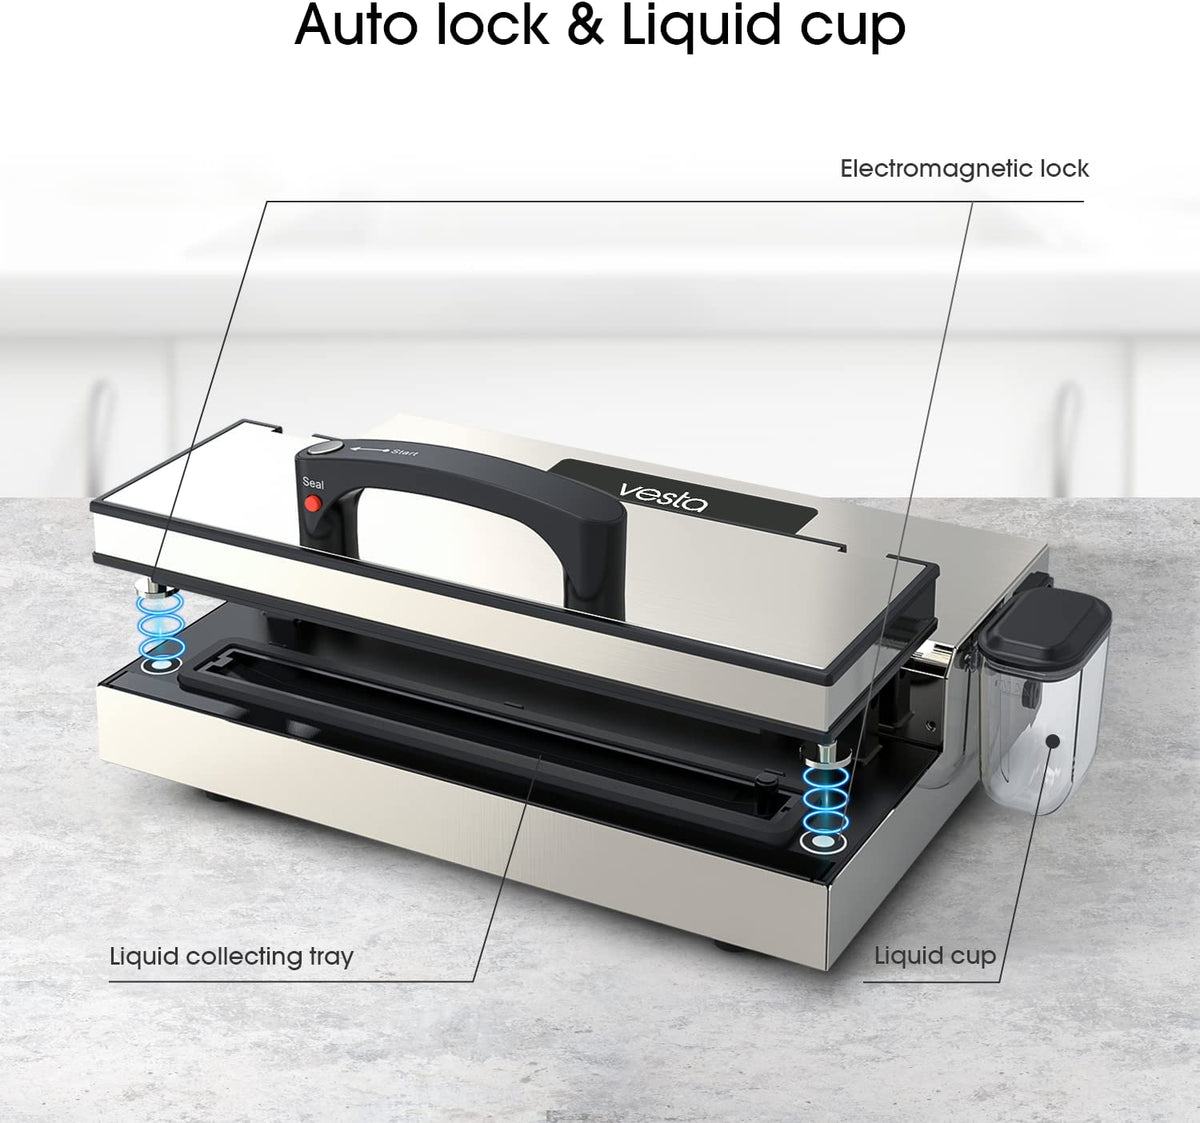 Chamber Vacuum Sealer with Smart Vac and Dry Pump – Vesta Precision